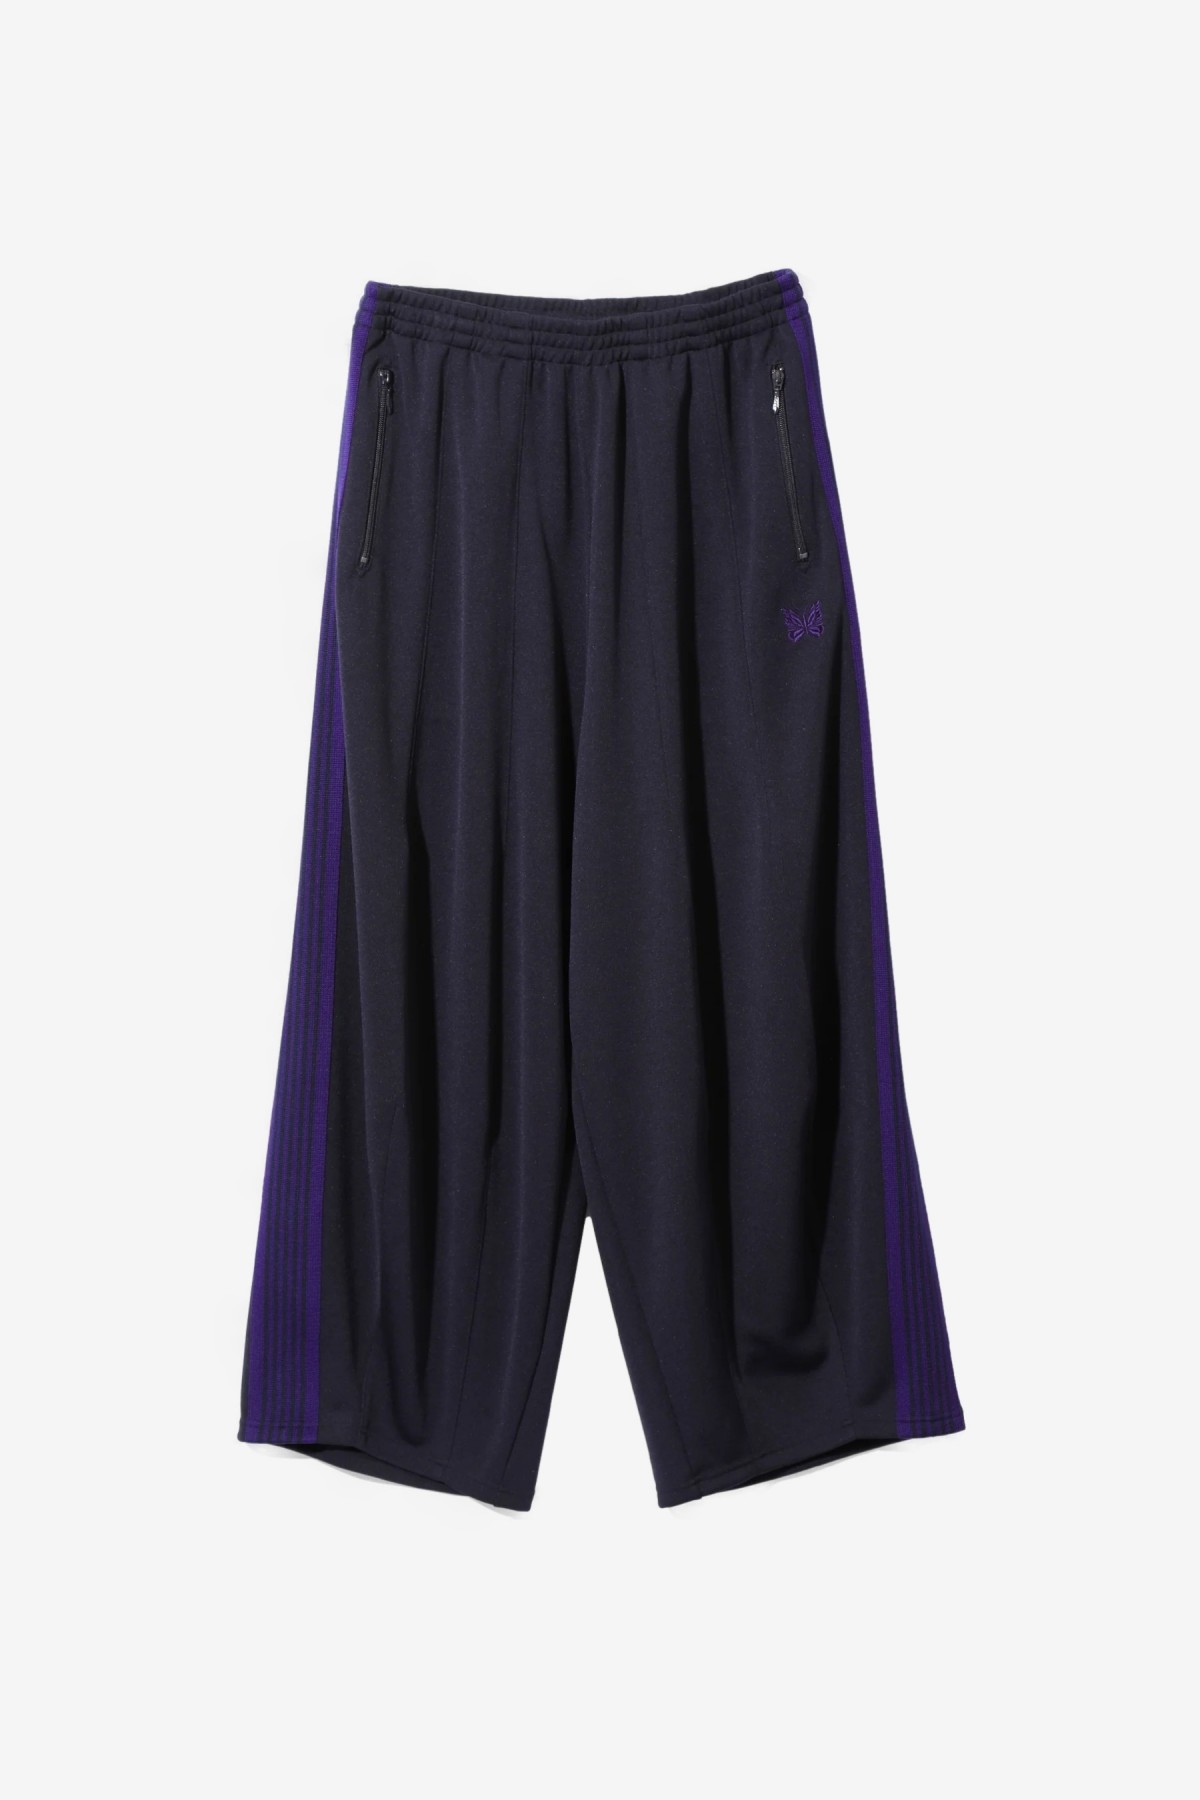 Needles Needles H.D. Track Pant Poly Smooth in Navy